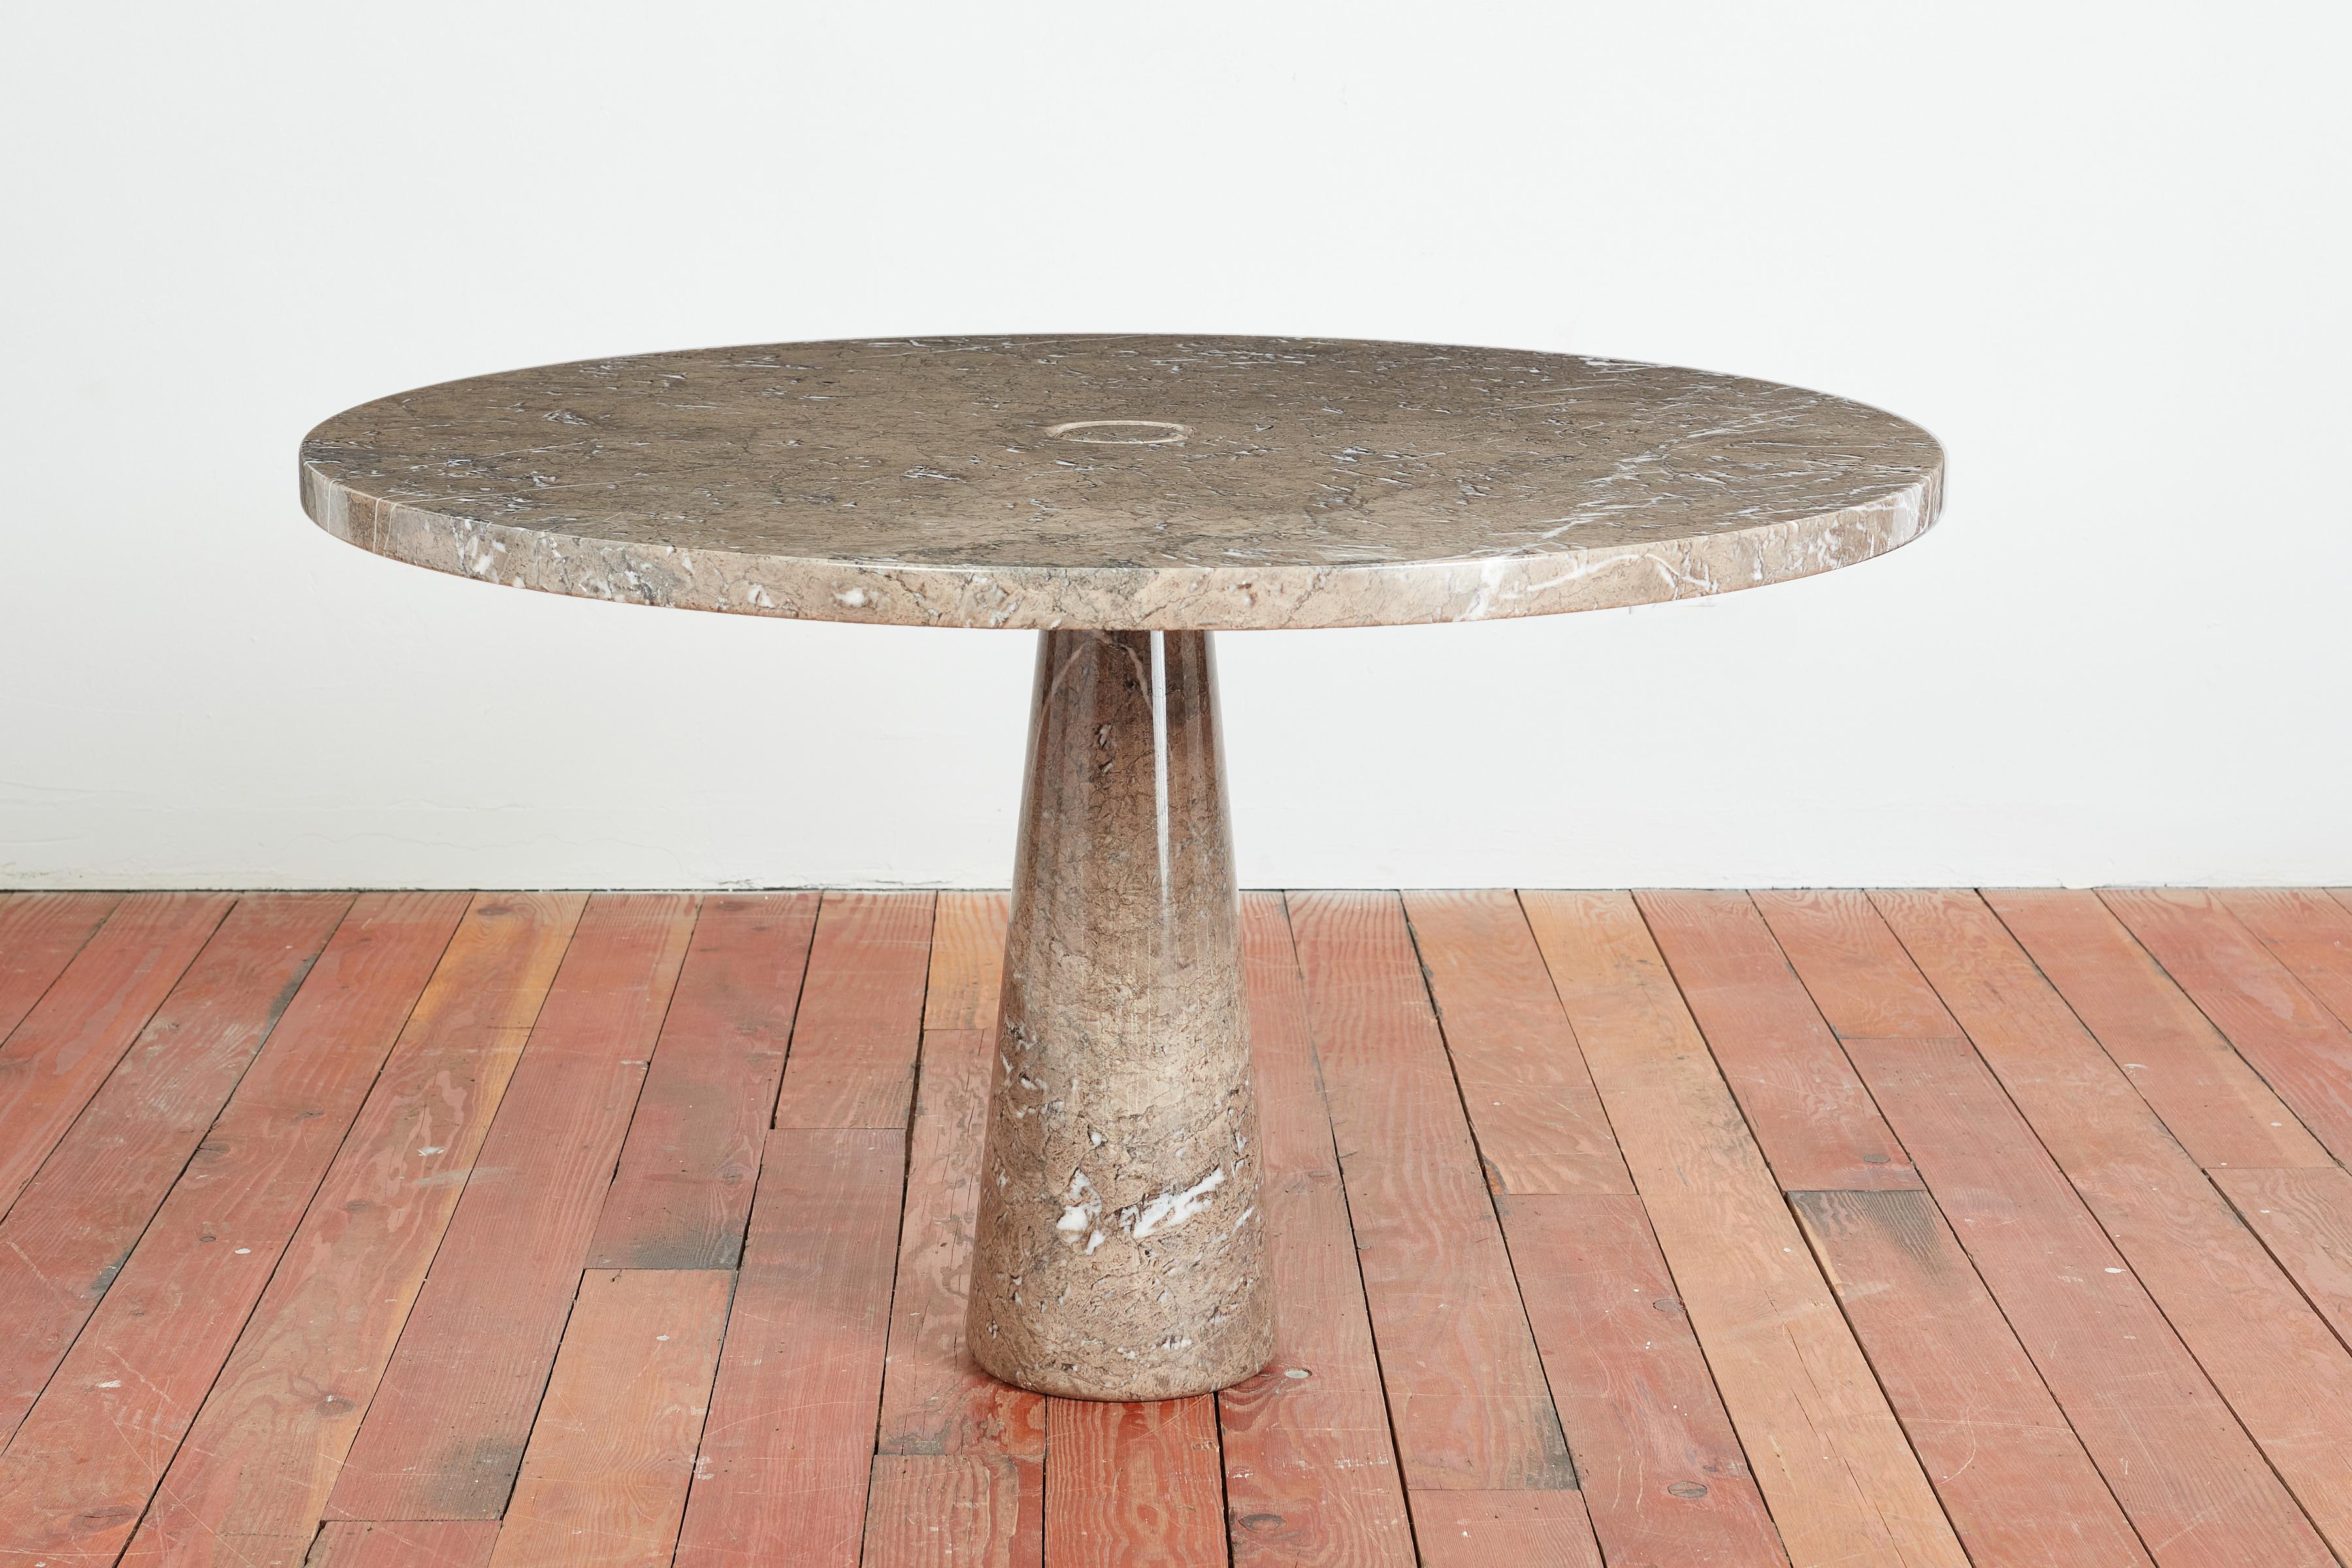 Dining Table by Angelo Mangiarotti - Italy, 1970s
Wonderful Greyish/ brown color - 